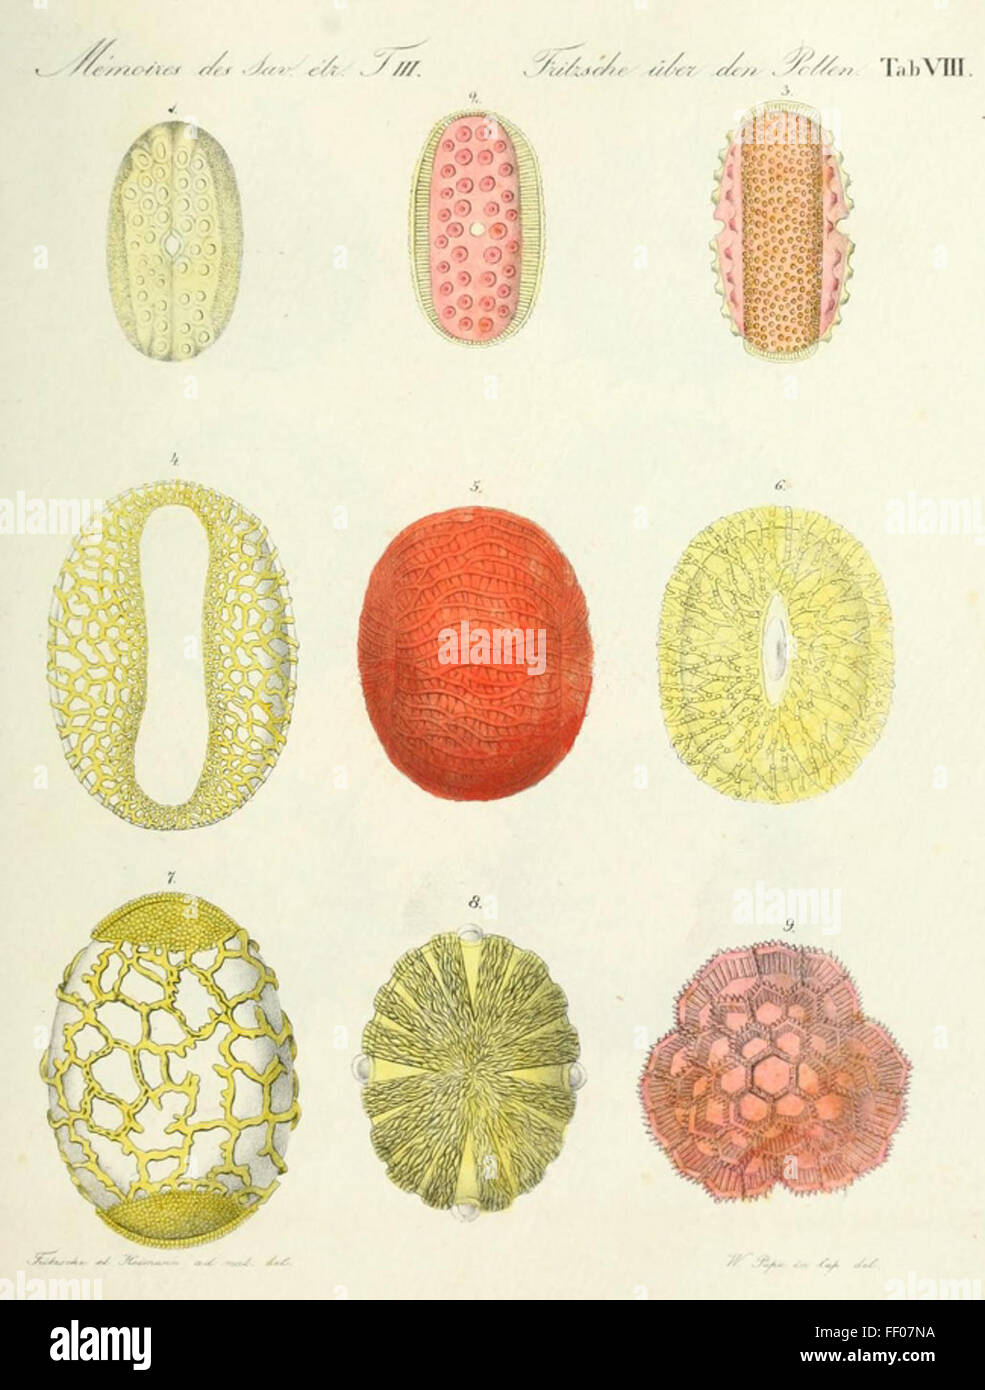 Illustration of Pollen from Carl Julius Fritzsche's Ueber den Pollen Illustration of Pollen from Carl Julius Fritzsche's Ueber den Pollen Stock Photo